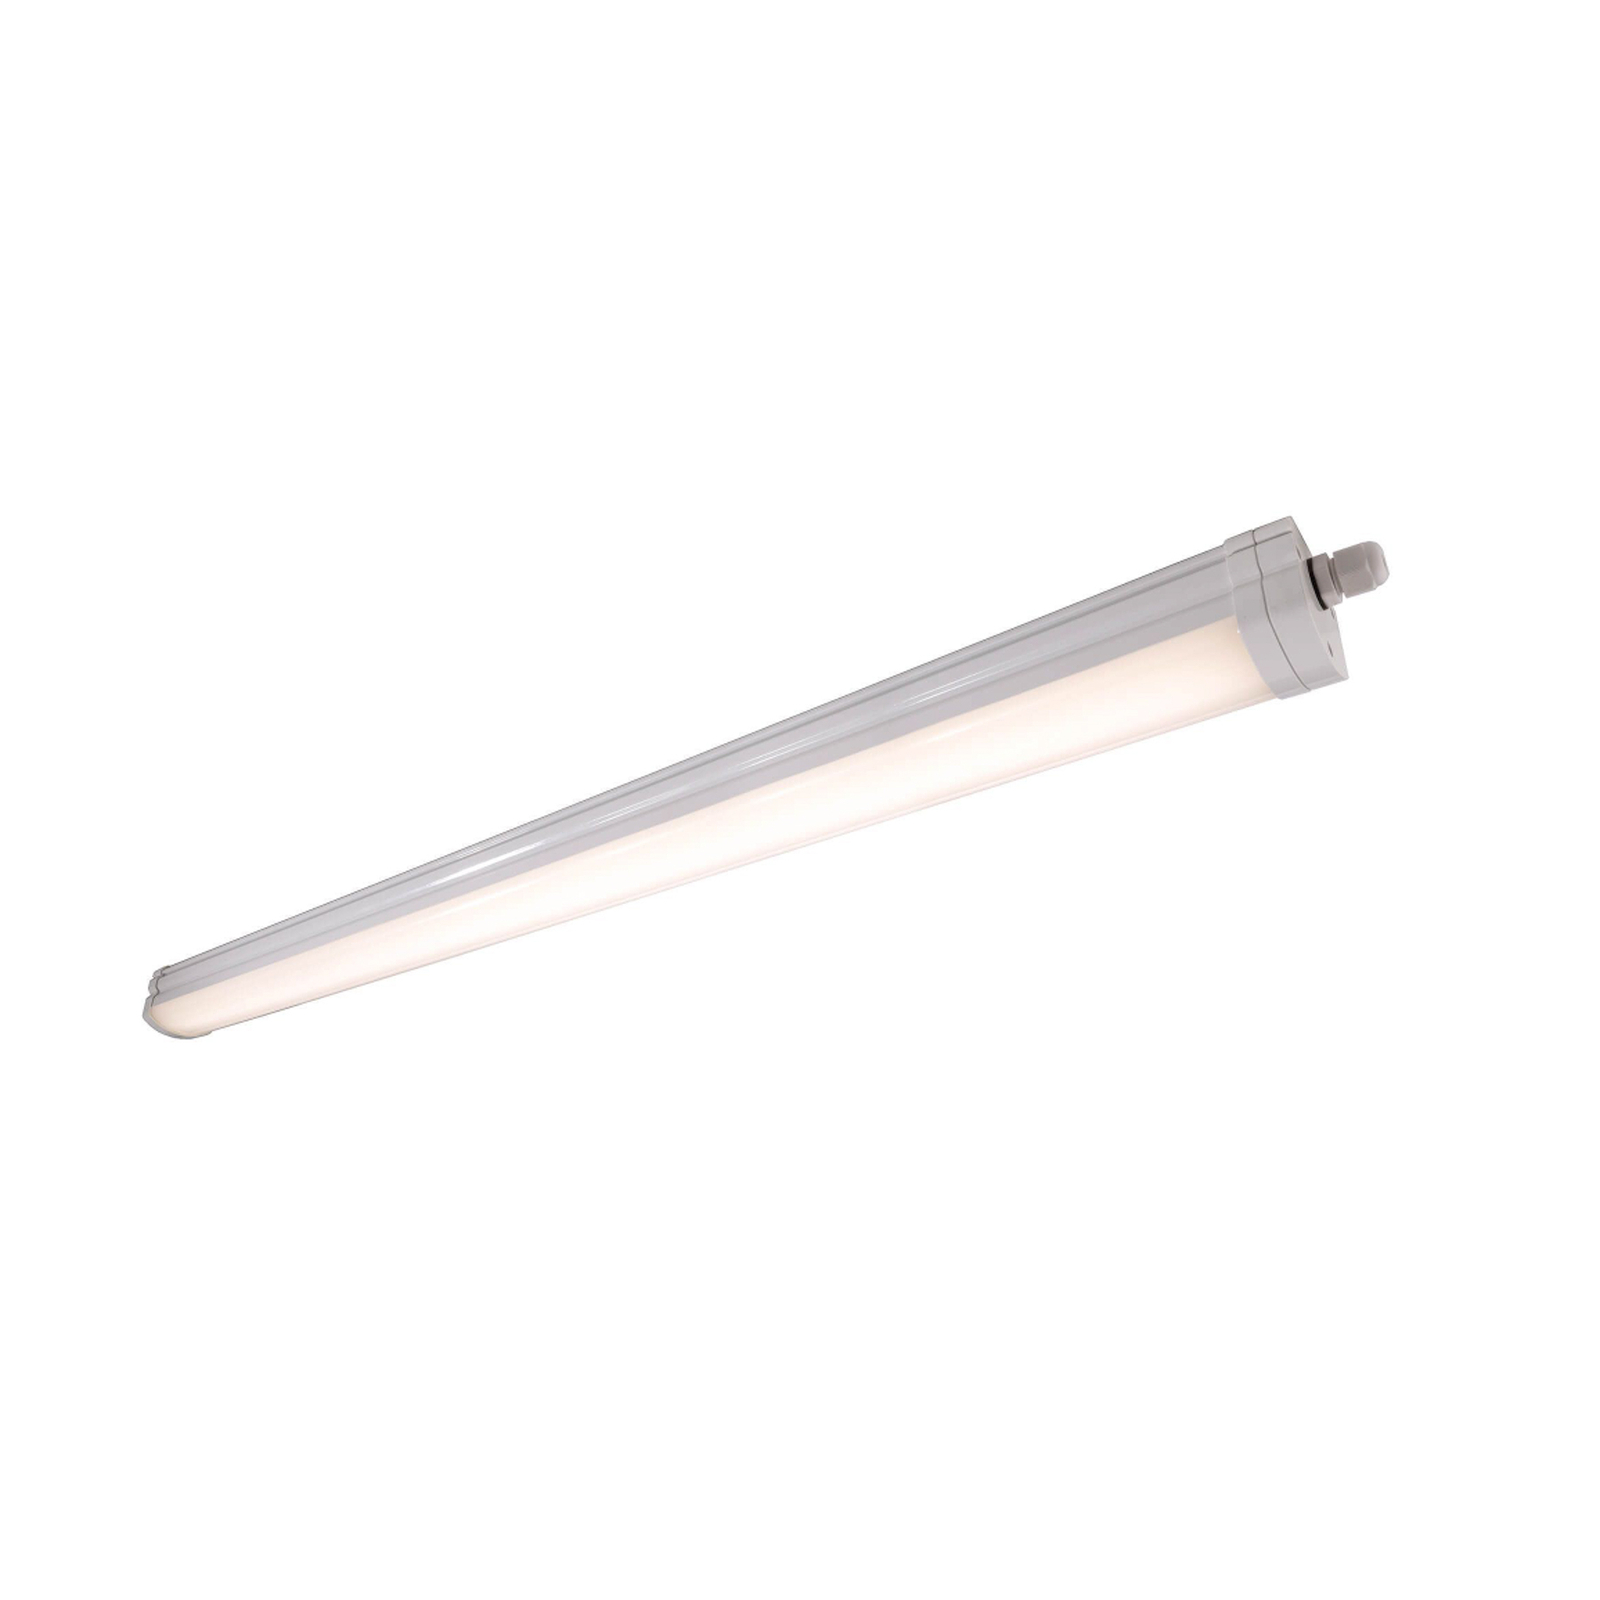 LED-Feuchtraumleuchte Tri Proof Motion 66,5 cm